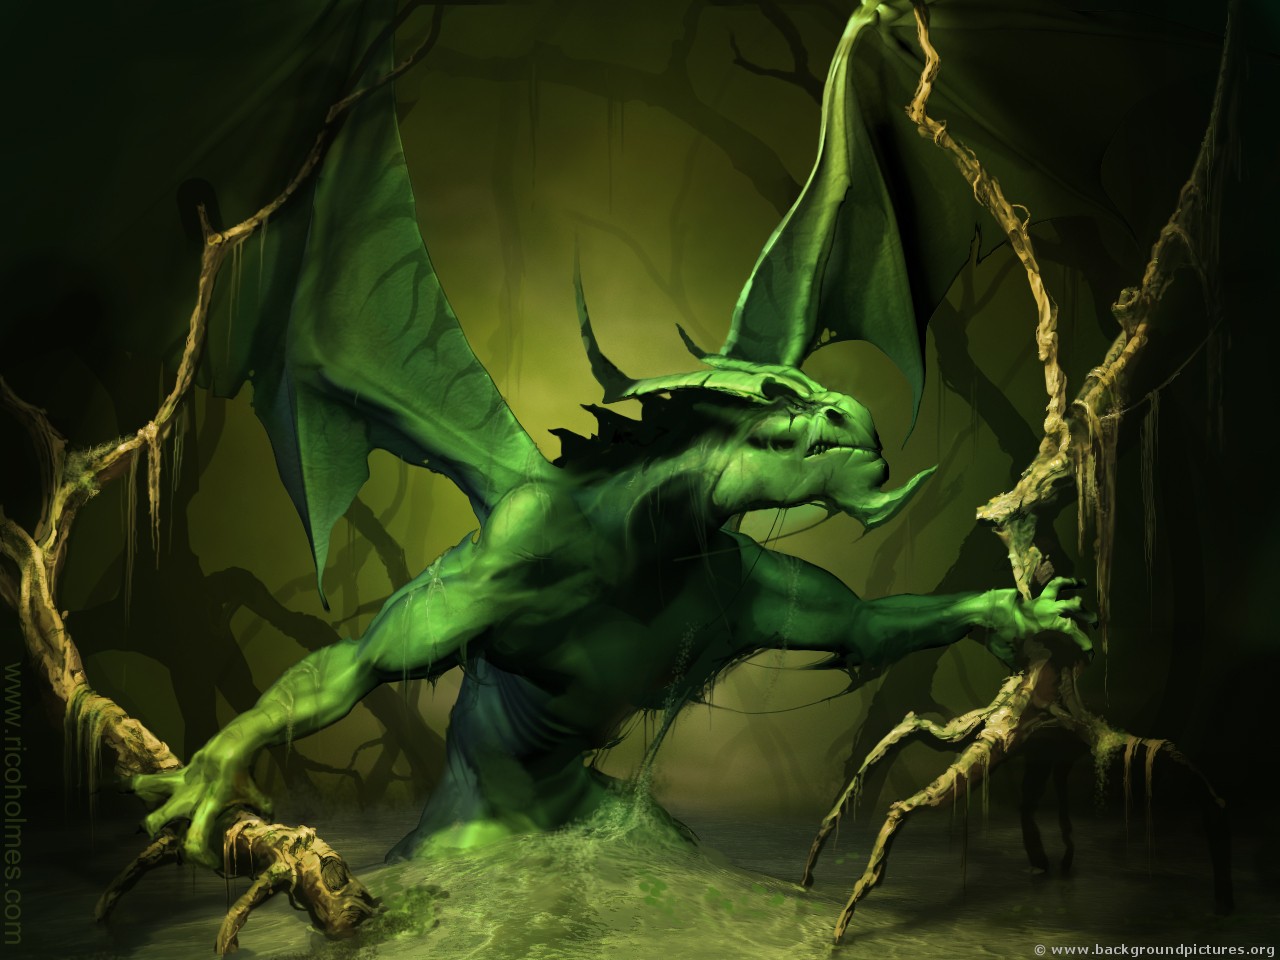 Super Awesome Green Dragon Artworks And Wallpaper